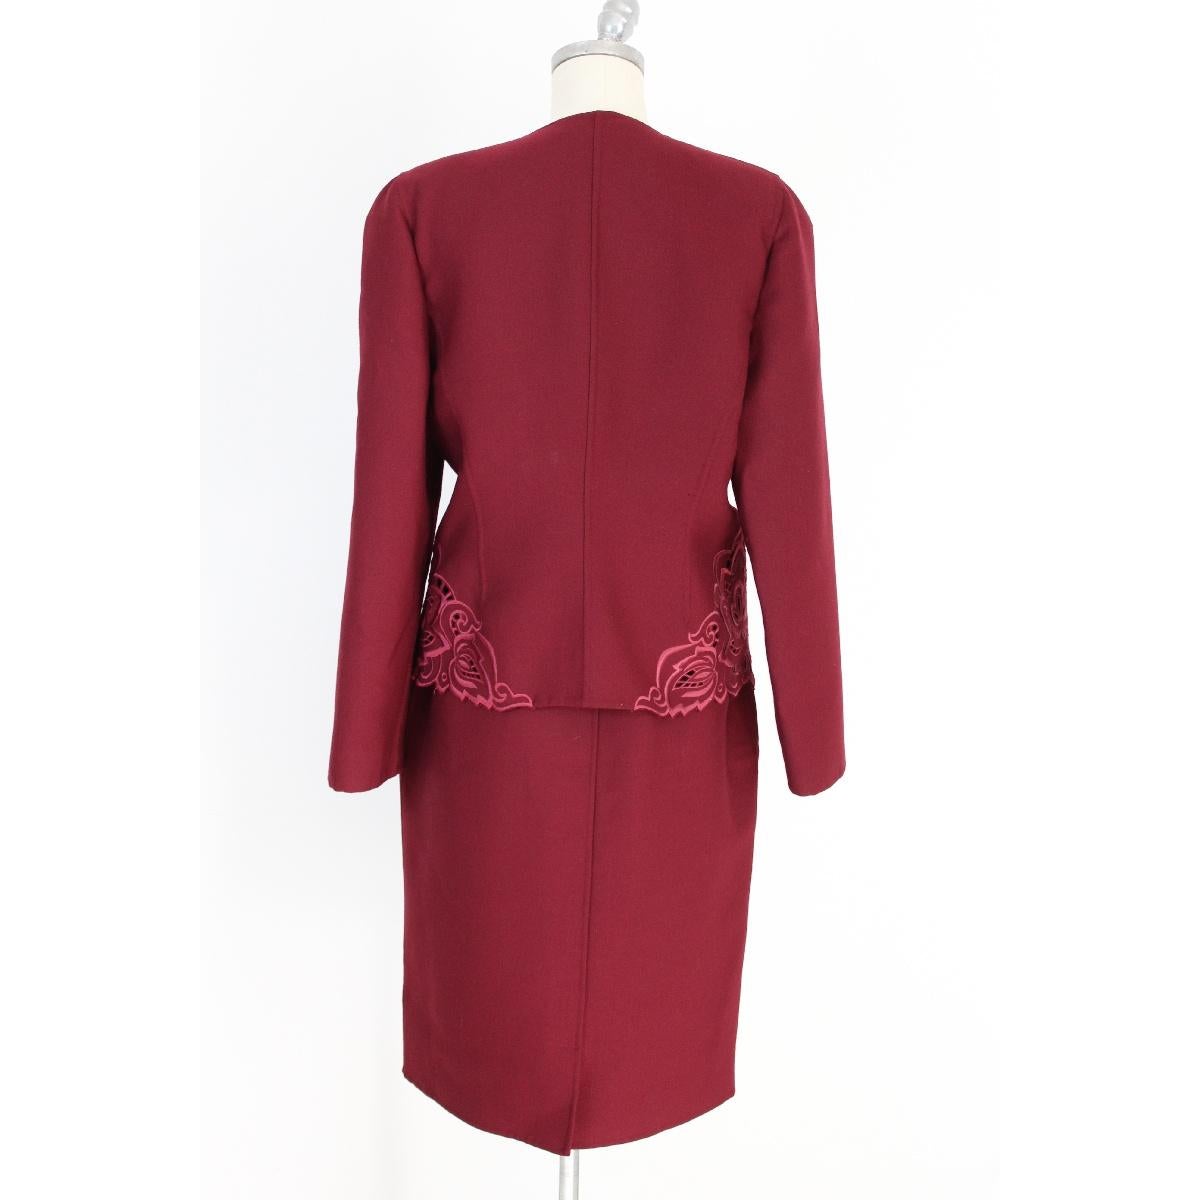 Mila Schon vintage jacket and skirt. The jacket has embroidery along the sides. Size 46, made in Italy burgundy color. New with label.

Size 46 It 12 Us 14 Uk

Shoulder: 46 cm
Bust / Chest: 53 cm
Sleeve: 62 cm
Length: 61 cm
Waist skirt: 40 cm
Skirt